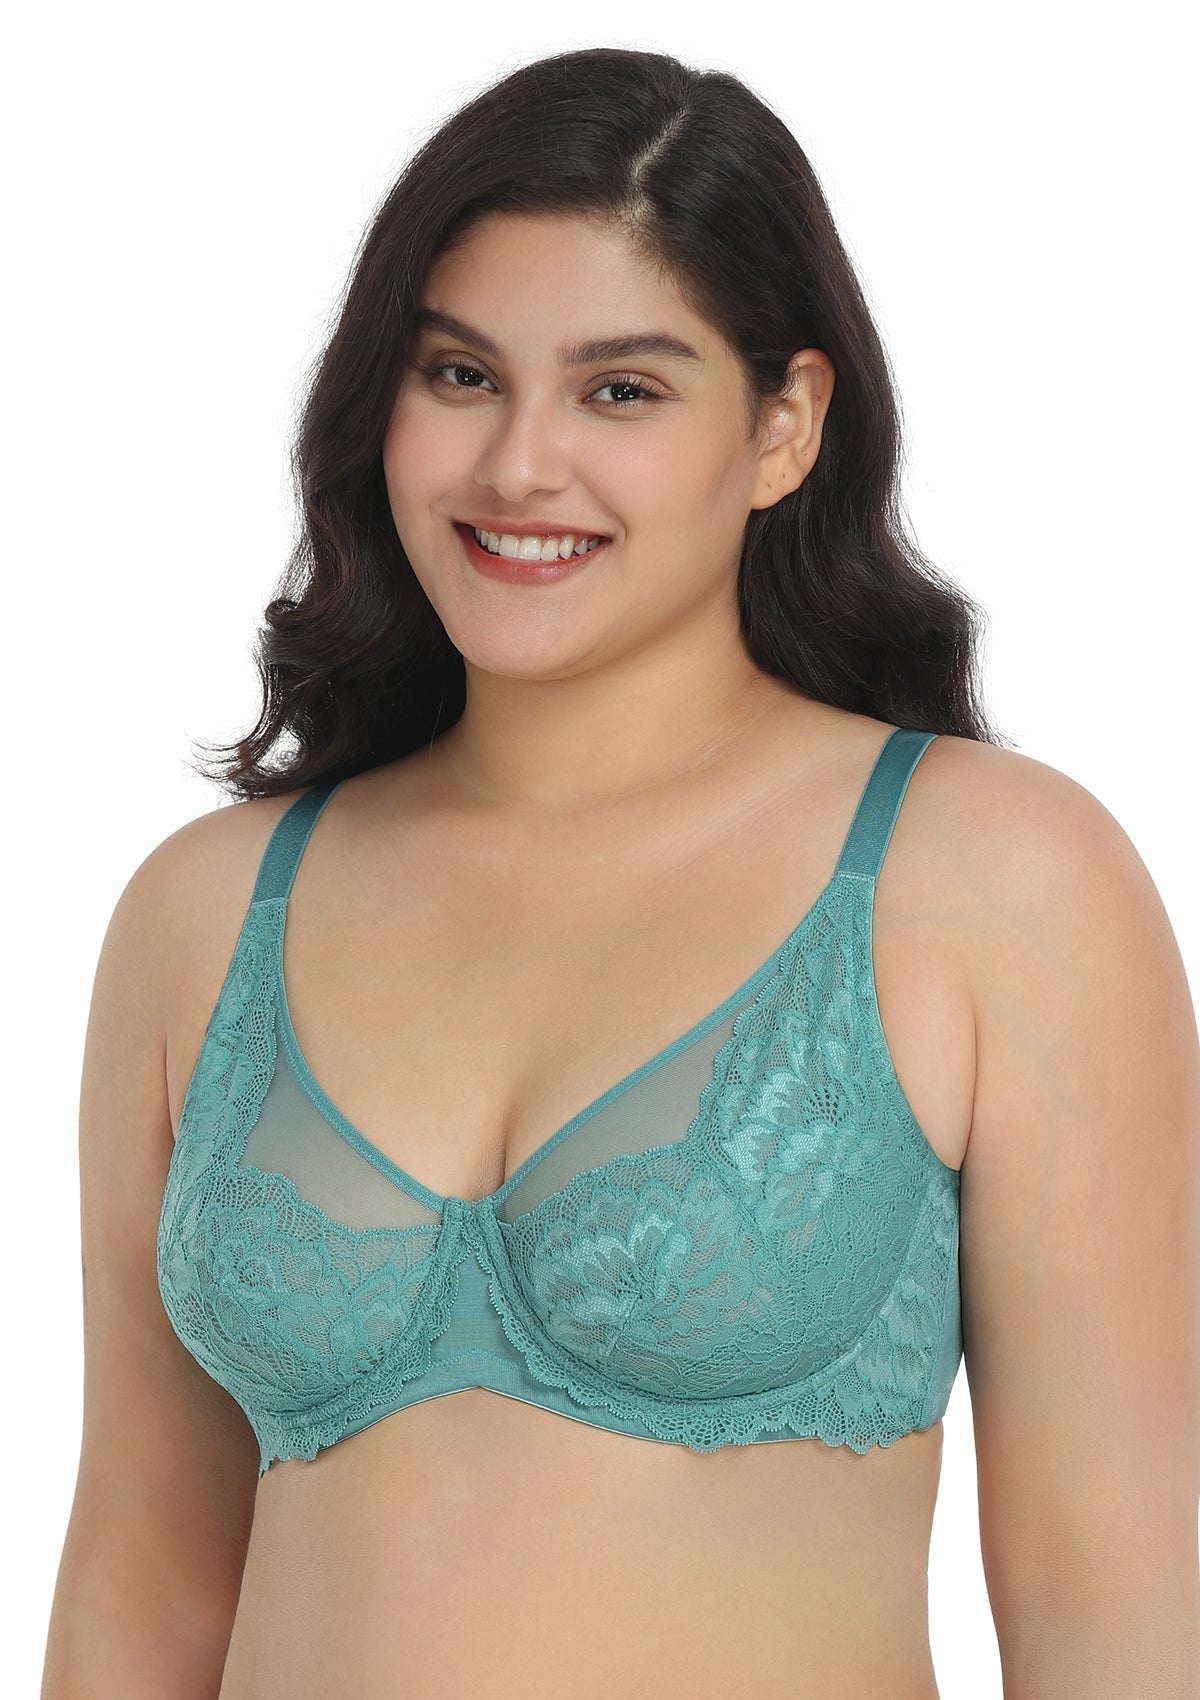 HSIA Paeonia Lace Full Coverage Underwire Non-Padded Uplifting Bra - Teal / 36 / C